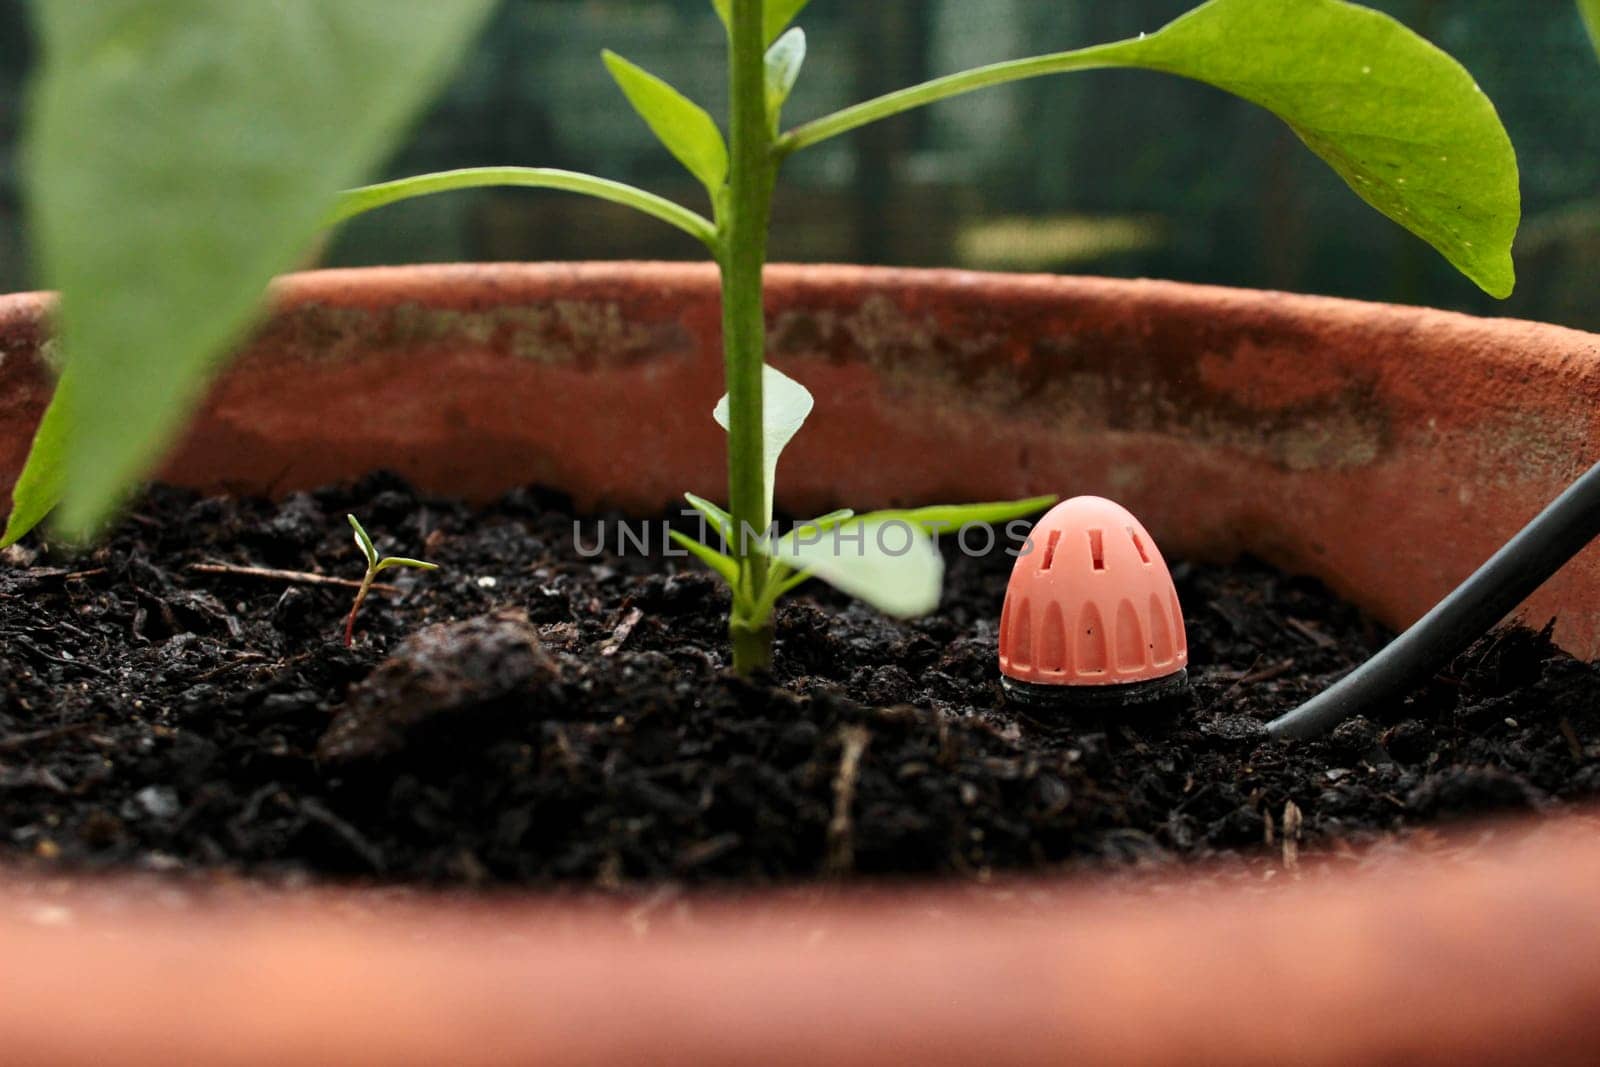 A pepper seedling grows in the soil in a pot and a water sprayer is nearby. High quality photo